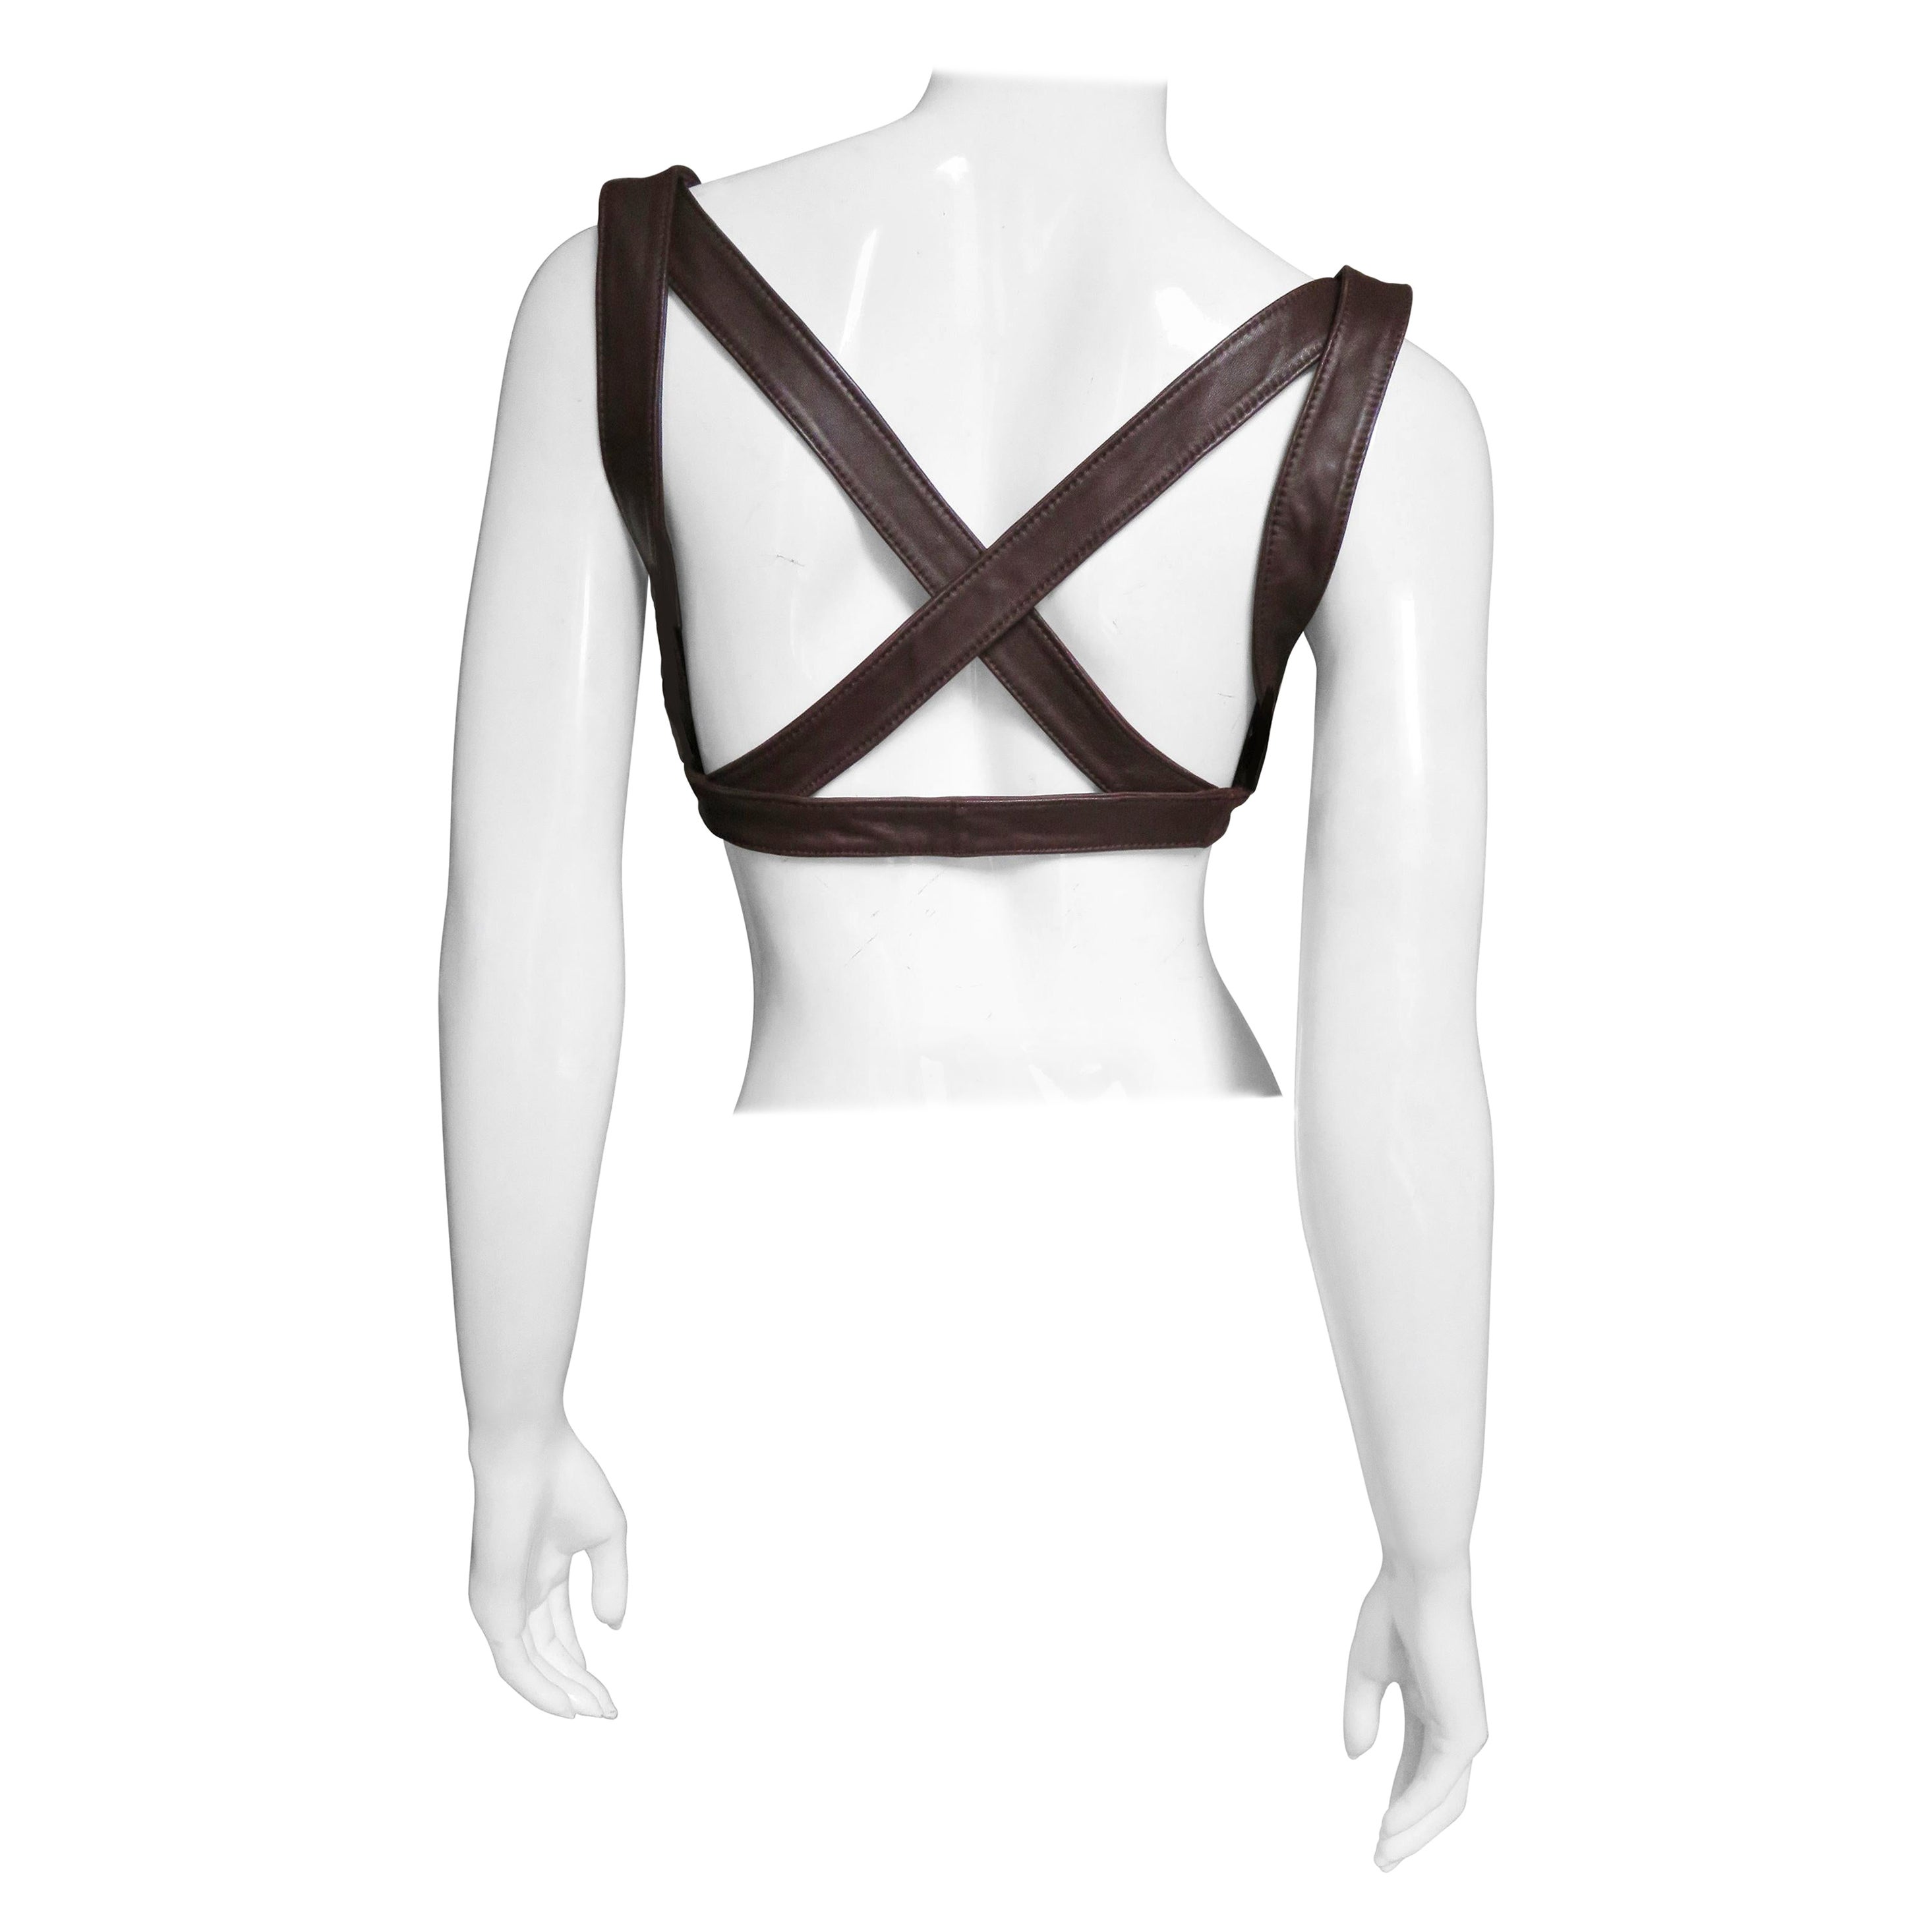 Krizia Leather Harness Top 1980s